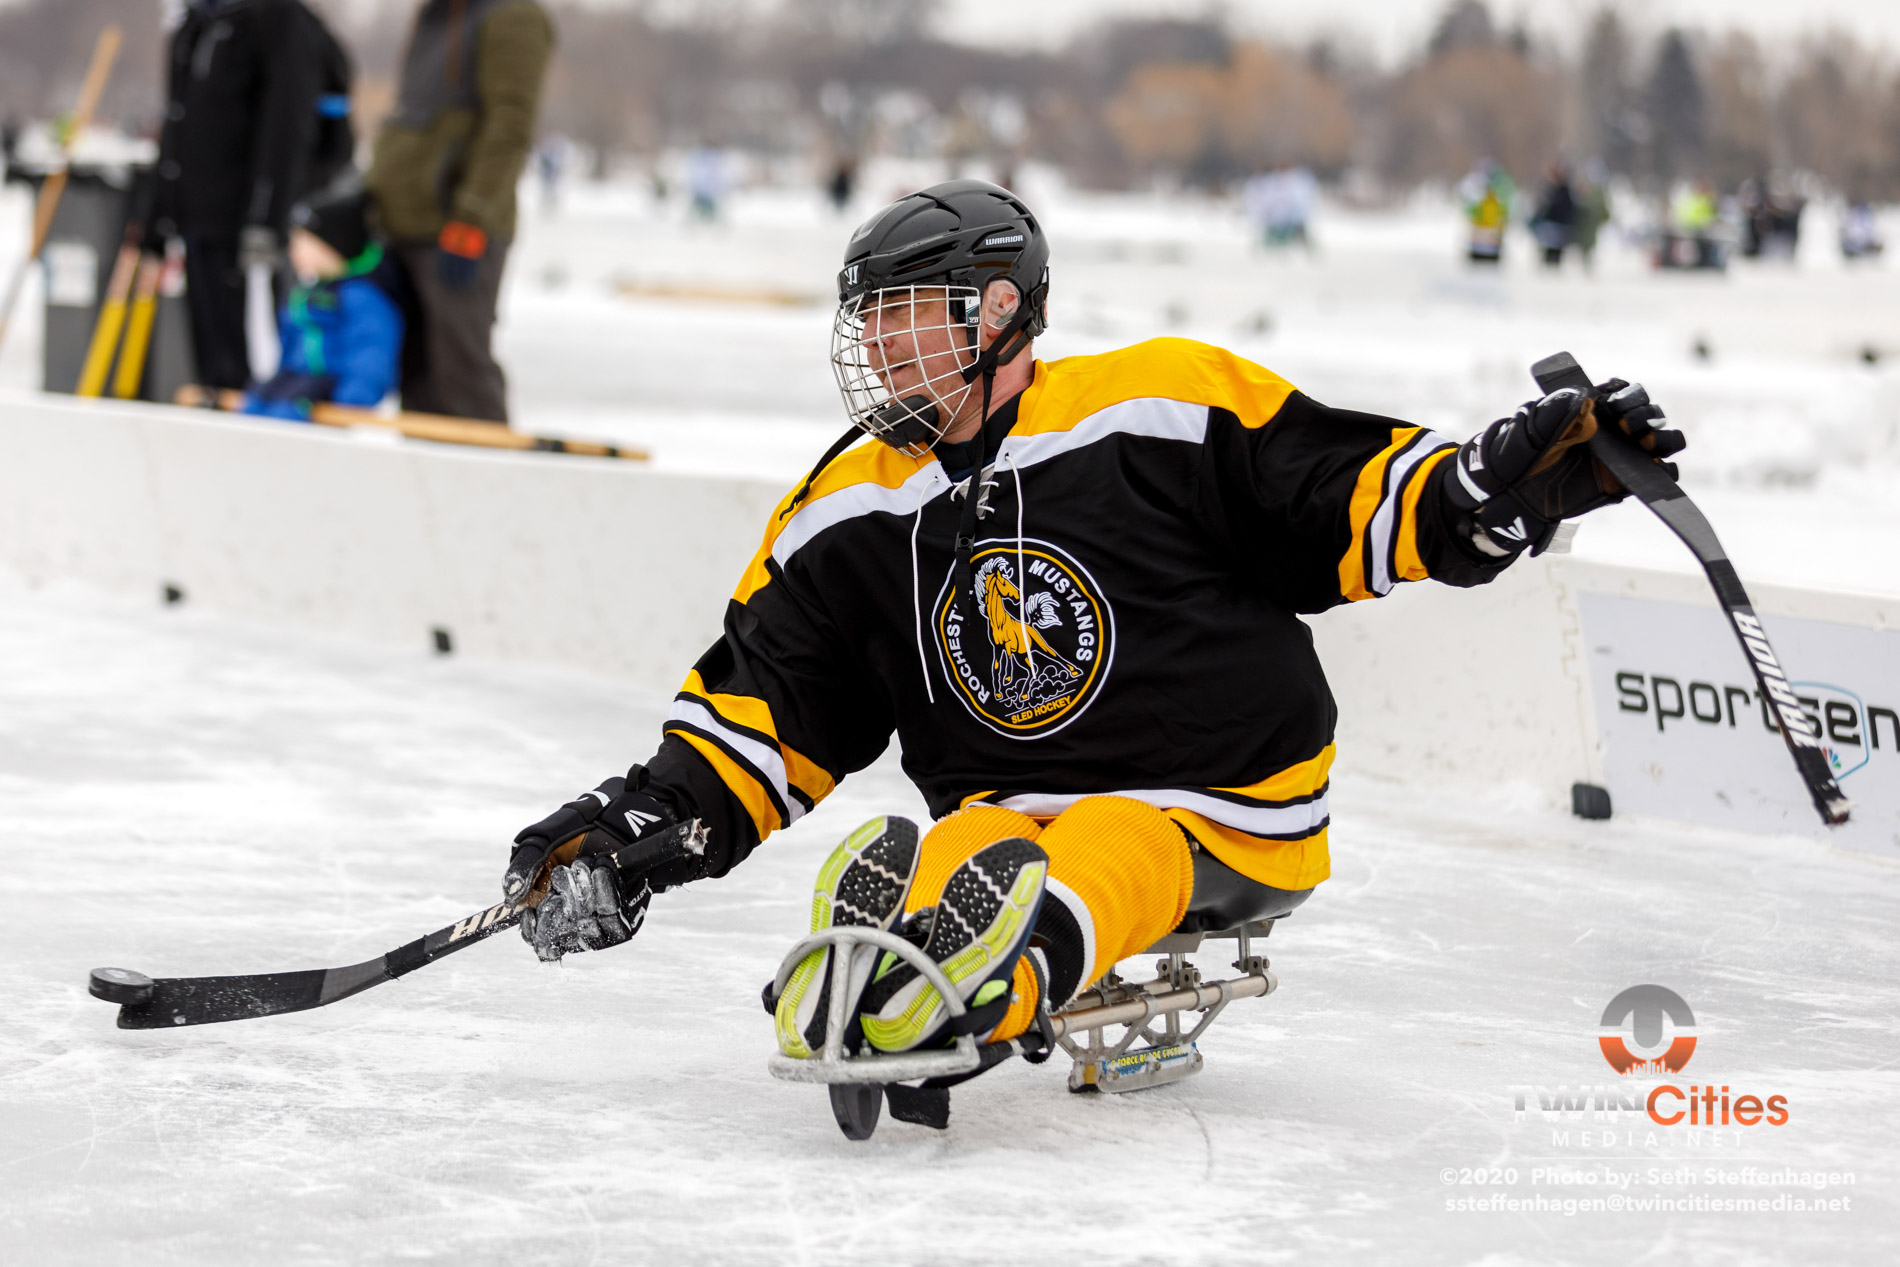 January 26, 2020 - Minneapolis, Minnesota, United States - Rochester Mustangs Gold take on Rochester Mustangs Black in the sled hockey championship game during the U.S. Pond Hockey Championships on Lake Nokomis. 

(Photo by Seth Steffenhagen/Steffenhagen Photography)